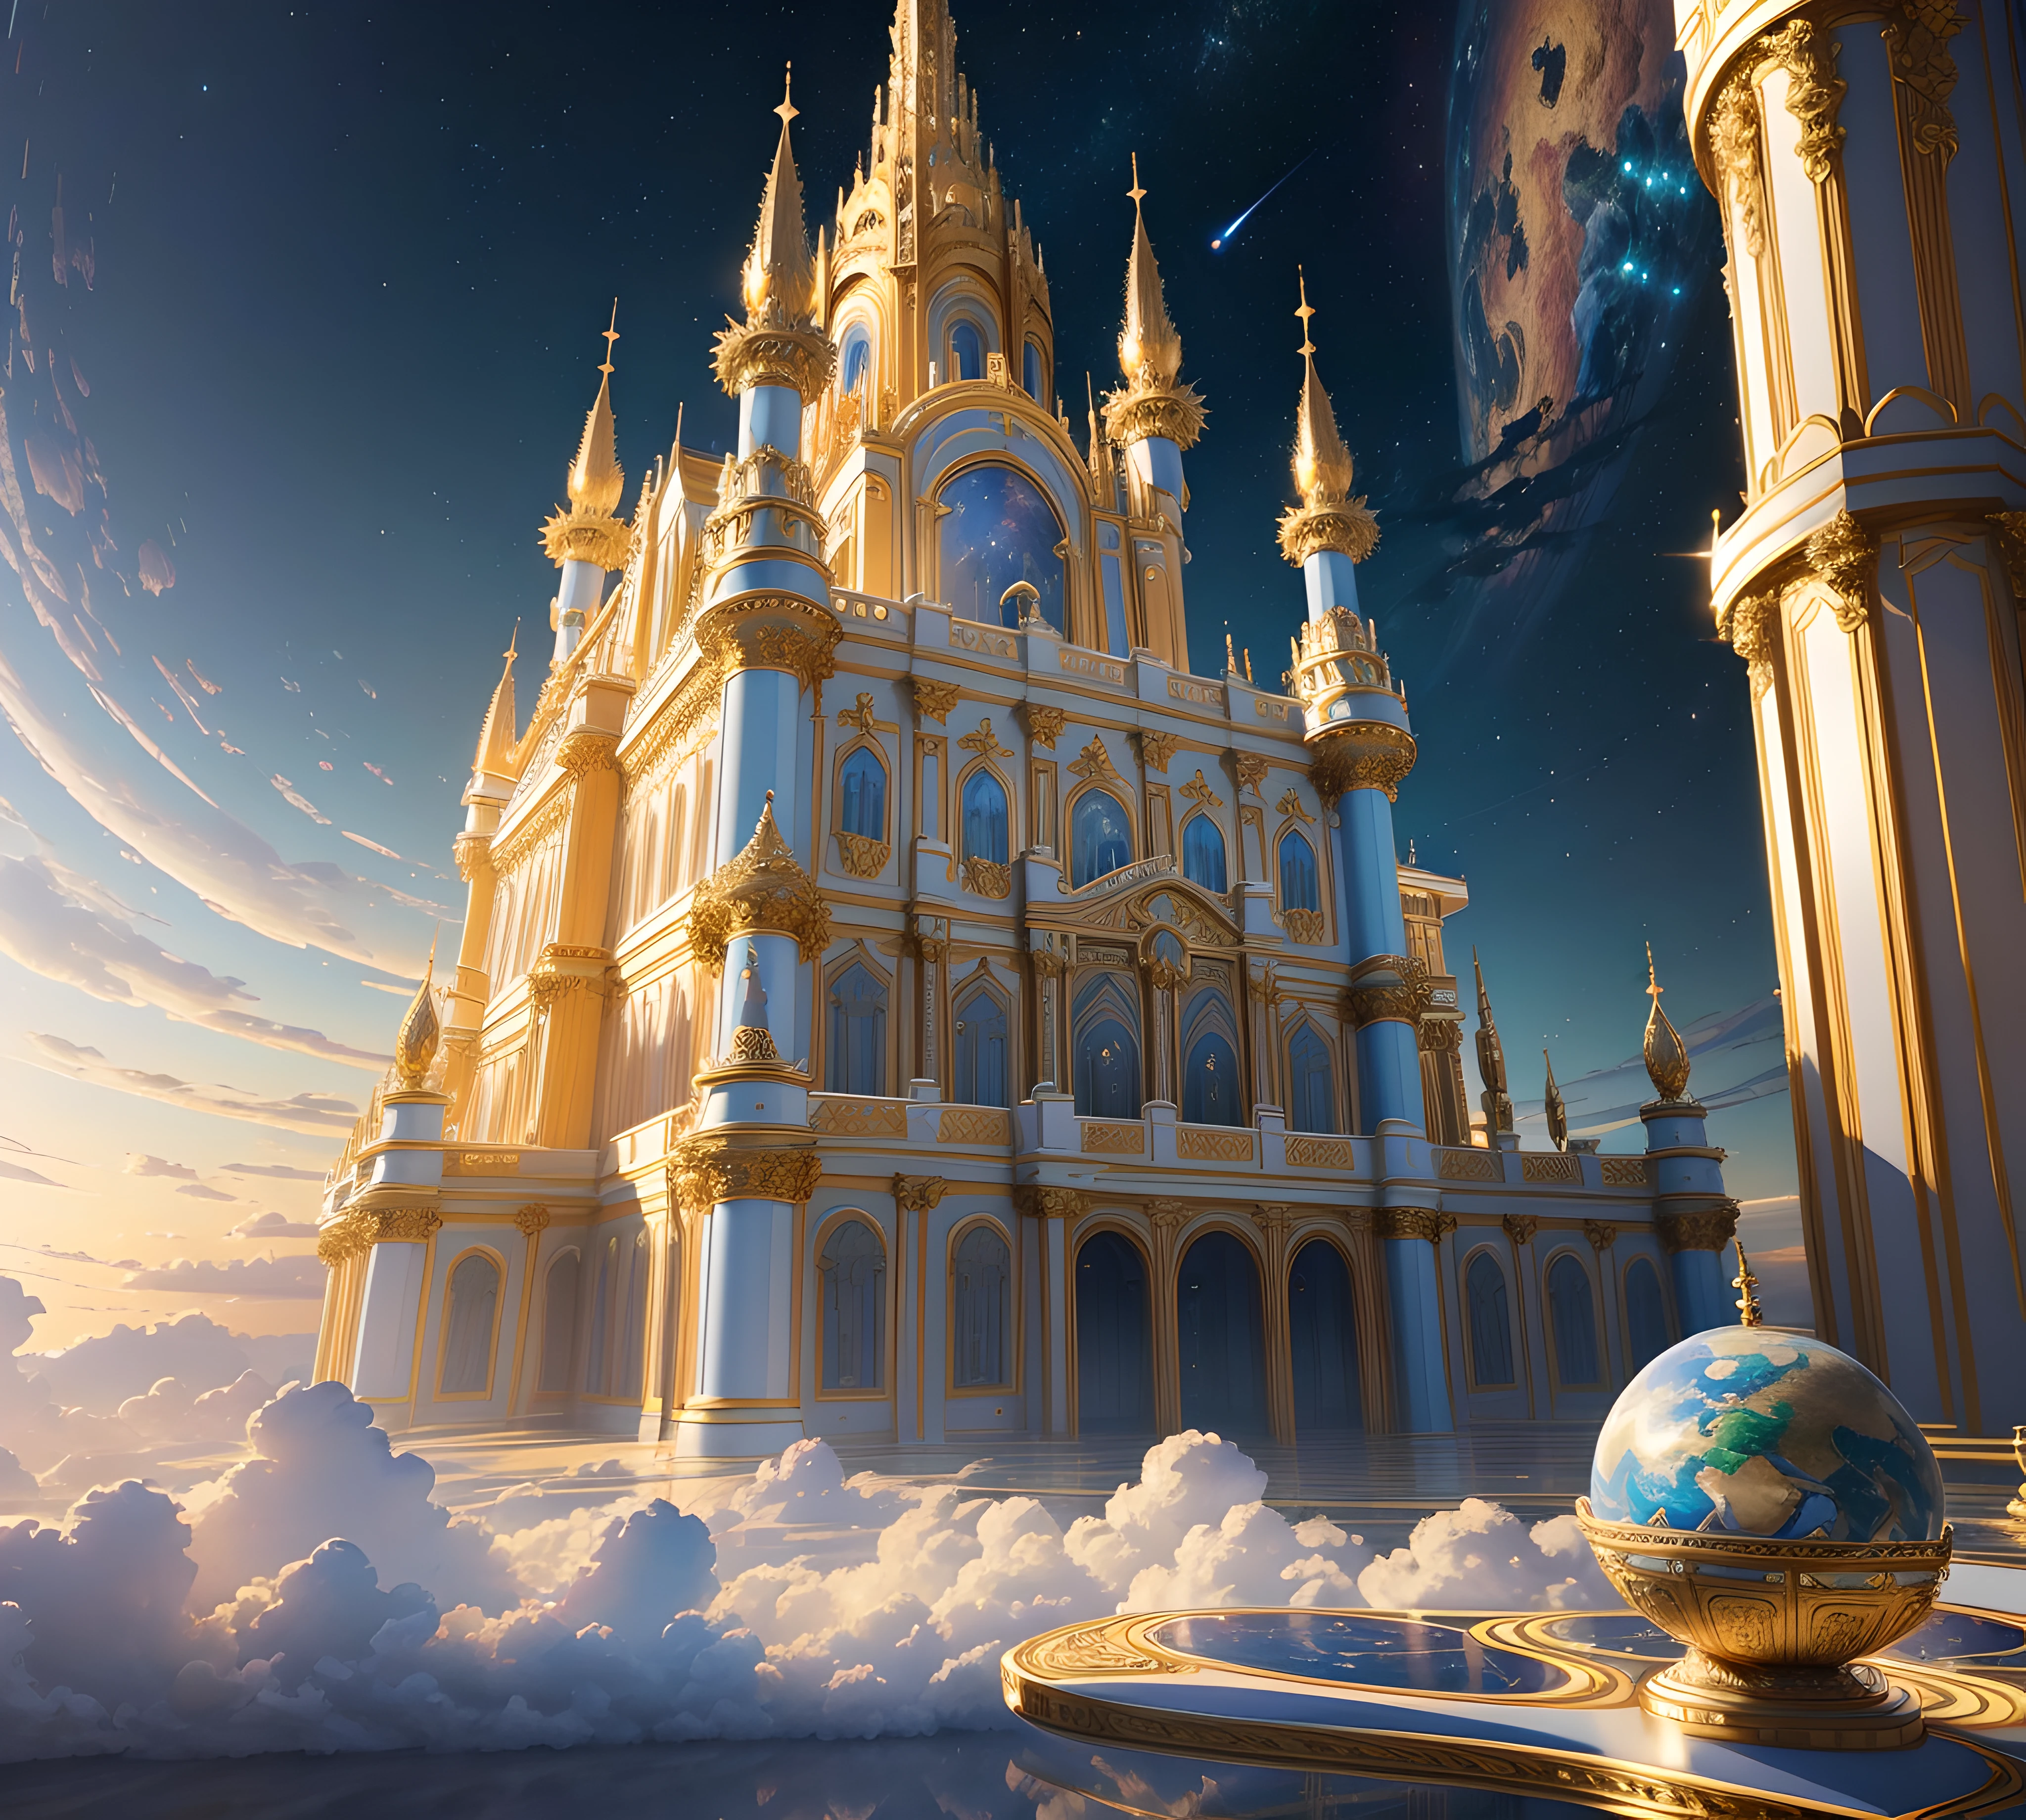 Best quality, masterpiece, photorealistic, (high resolution CGI artwork 8k), create a architectural masterpiece of an opulent celestial castle floating in the sky, the color scheme is ethereal in holographic reflective pale blue, golds, and blue marble, ornate, high-resolution, 3D-rendered masterpiece of digital art, heavenly, dreamy glimmer